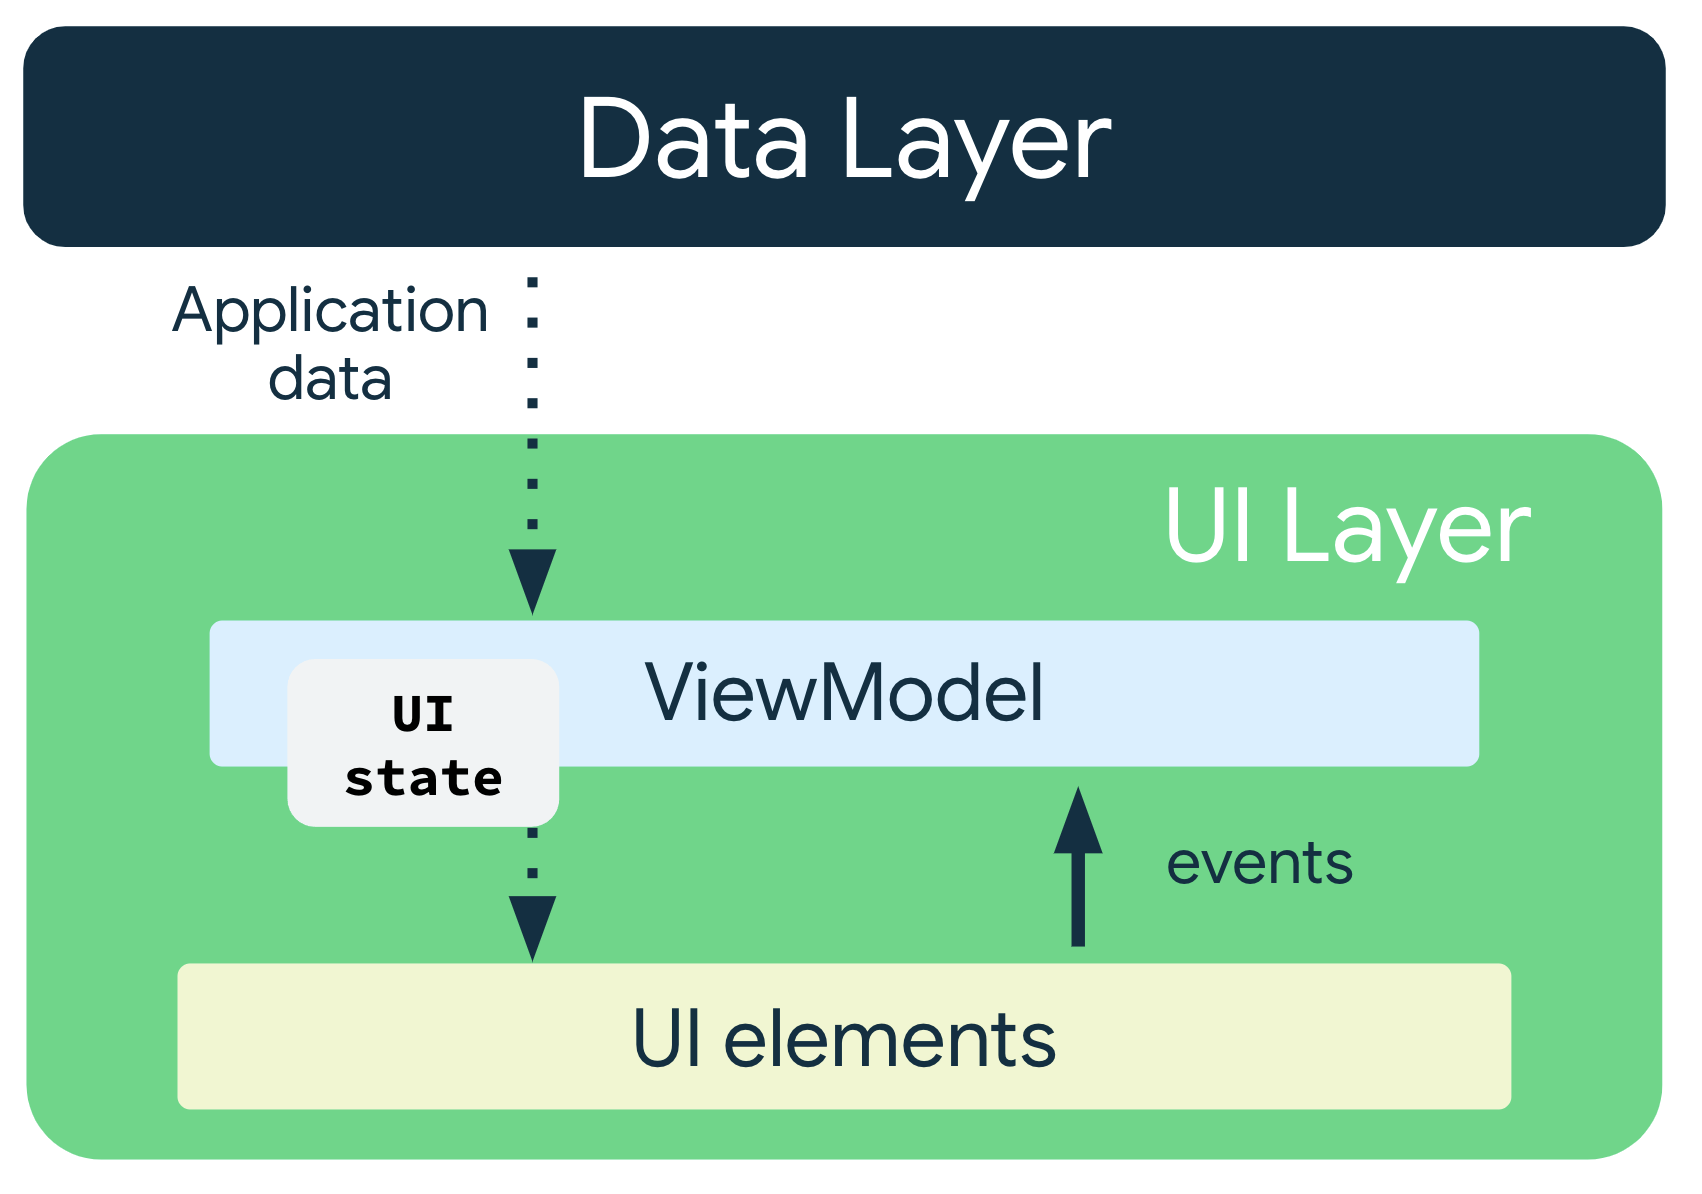 Application data flows from the data layer to the ViewModel. UI state
    flows from the ViewModel to the UI elements, and events flow from the UI
    elements back to the ViewModel.